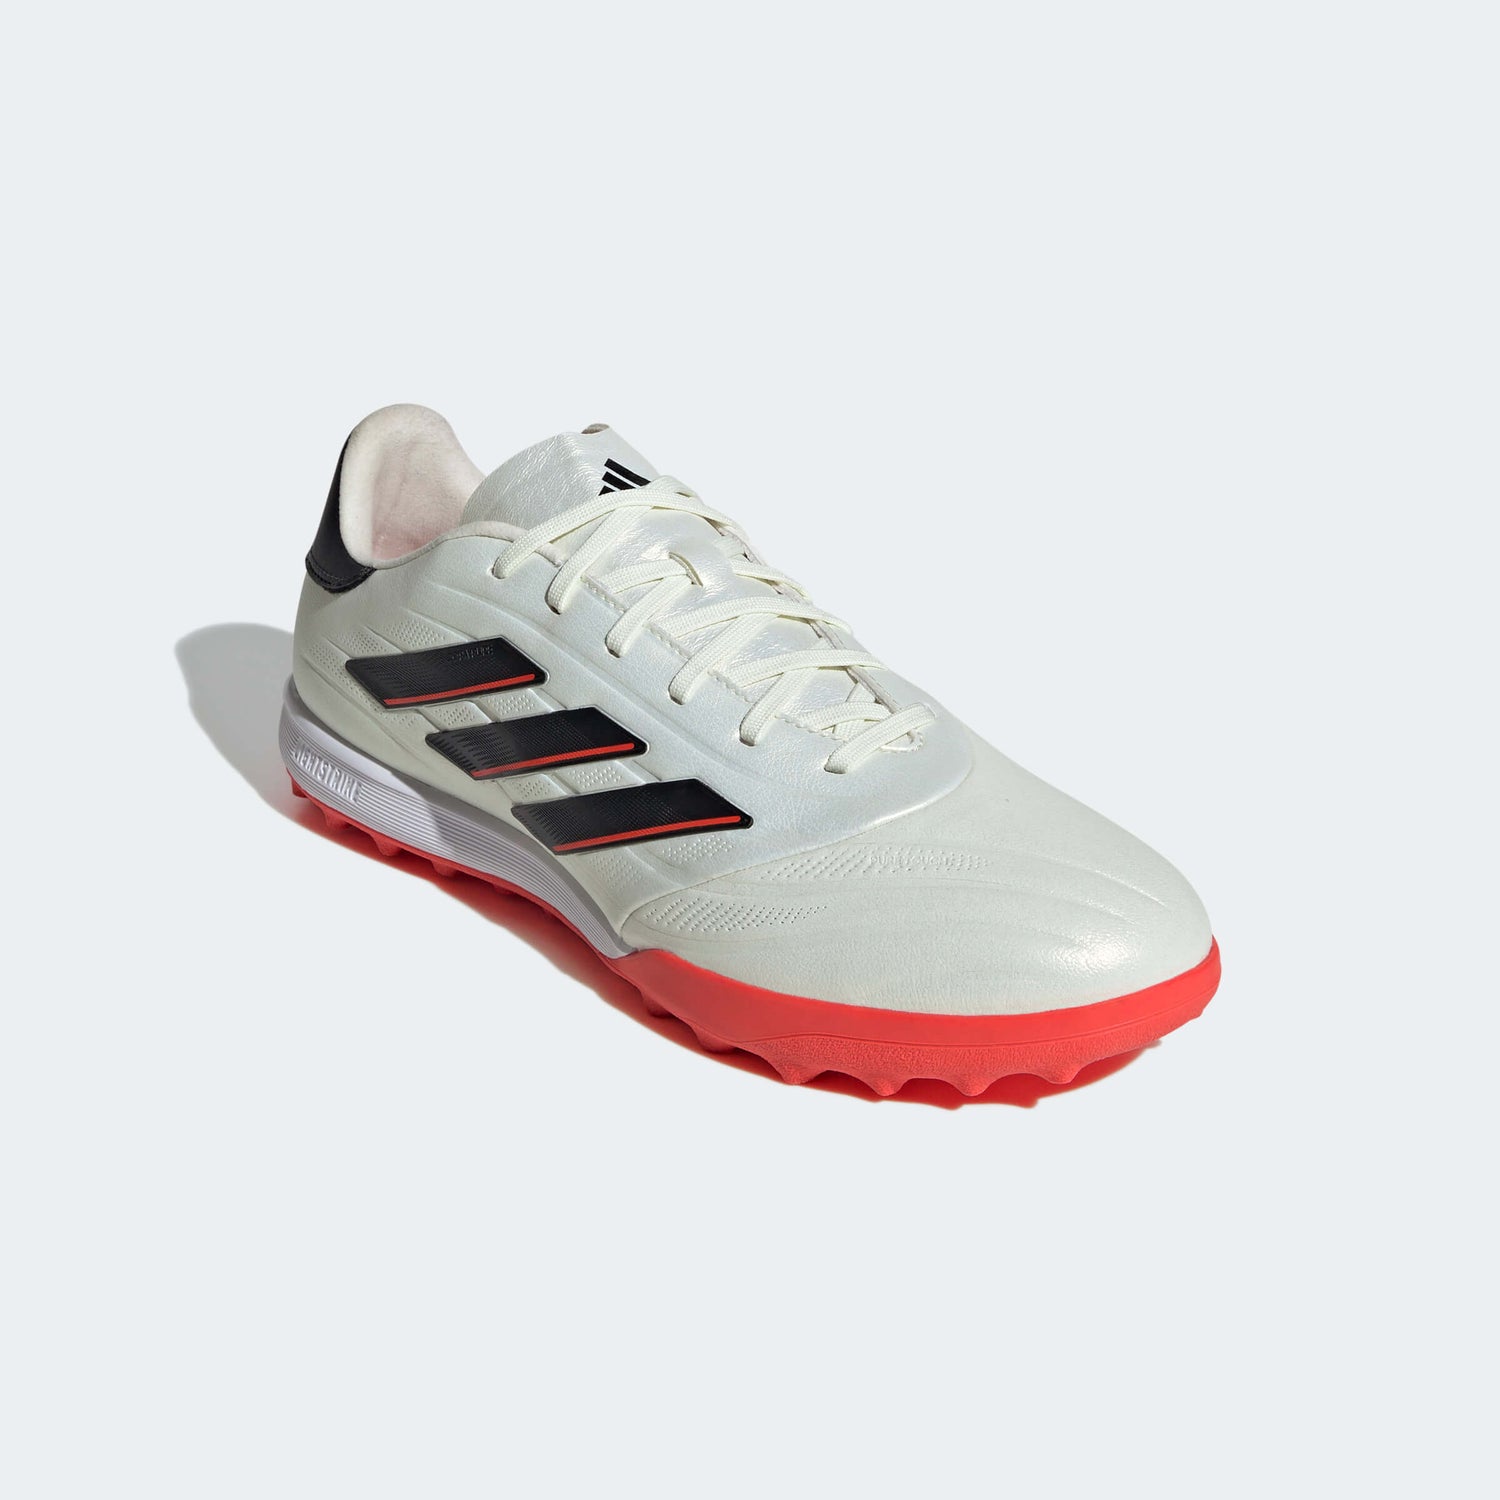 adidas Copa Pure 2 Elite Turf - Solar Energy Pack (SP24) (Lateral - Front)